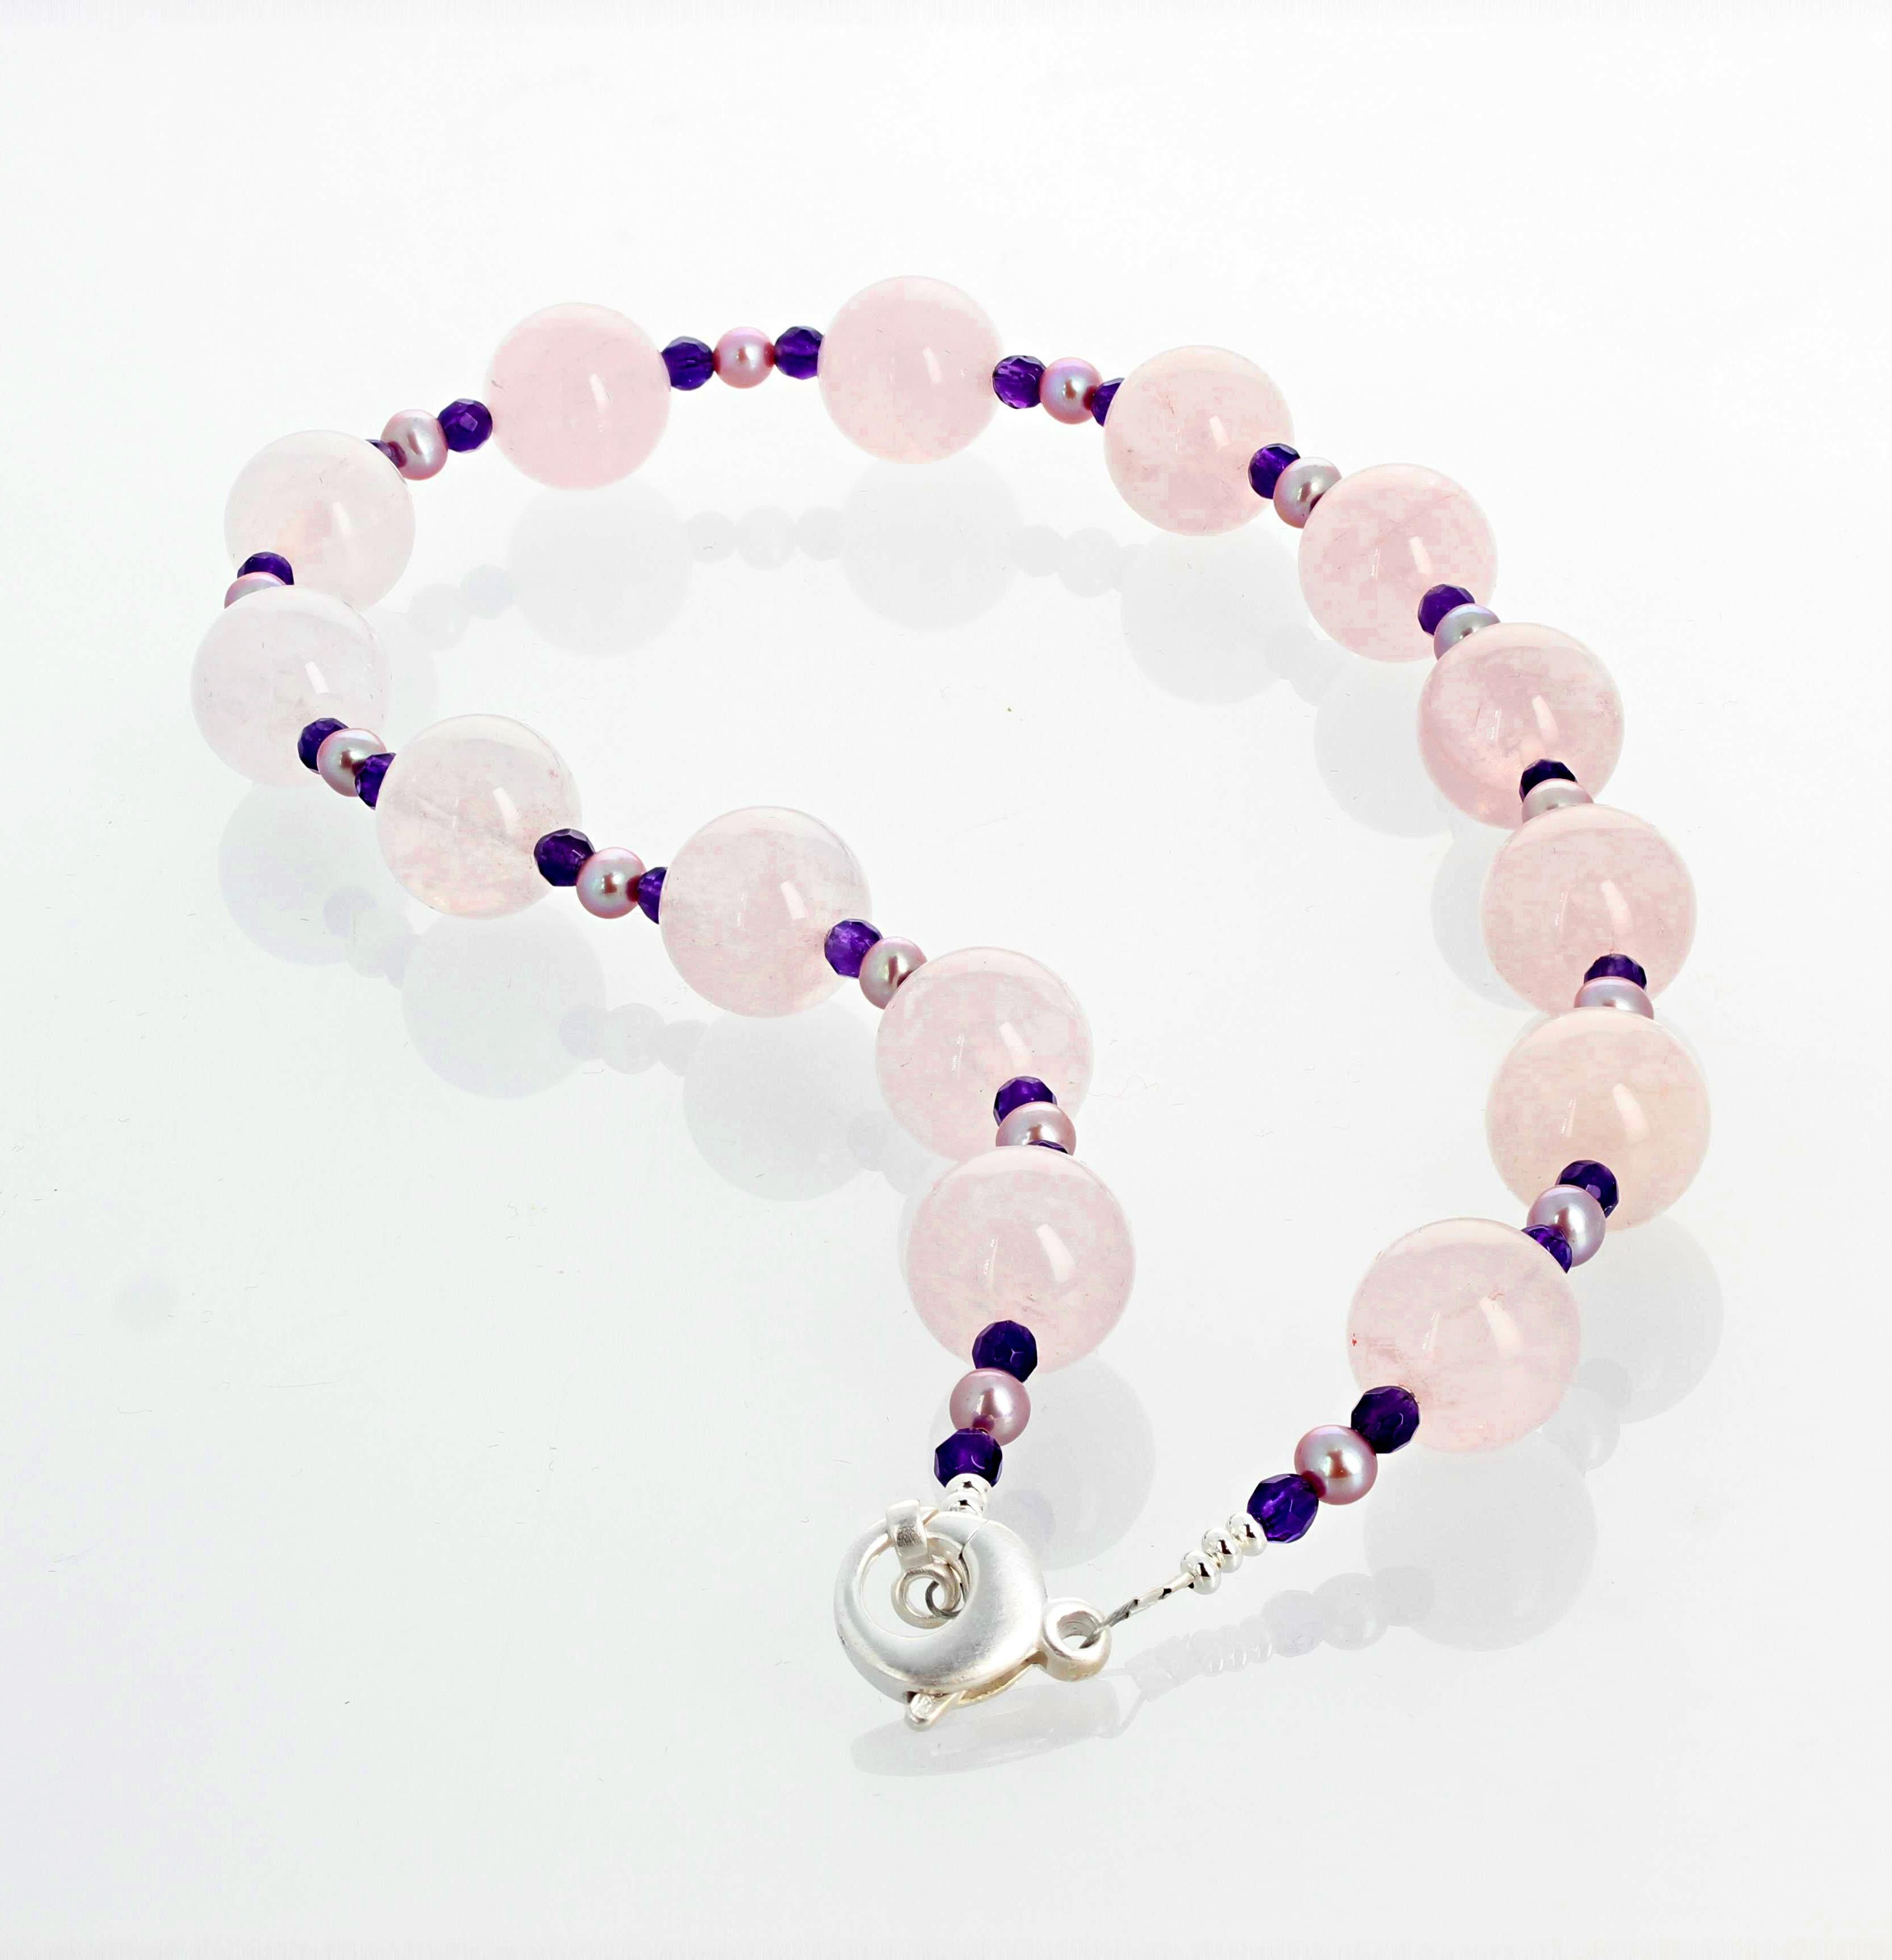 Elegant lightly translucent glowing round natural pink real Rose Quartz - 14mm - enhanced with little gem cut natural real Amethysts and very pale glowing little cultured real Pearls set in this lovely single strand necklace with sterling silver